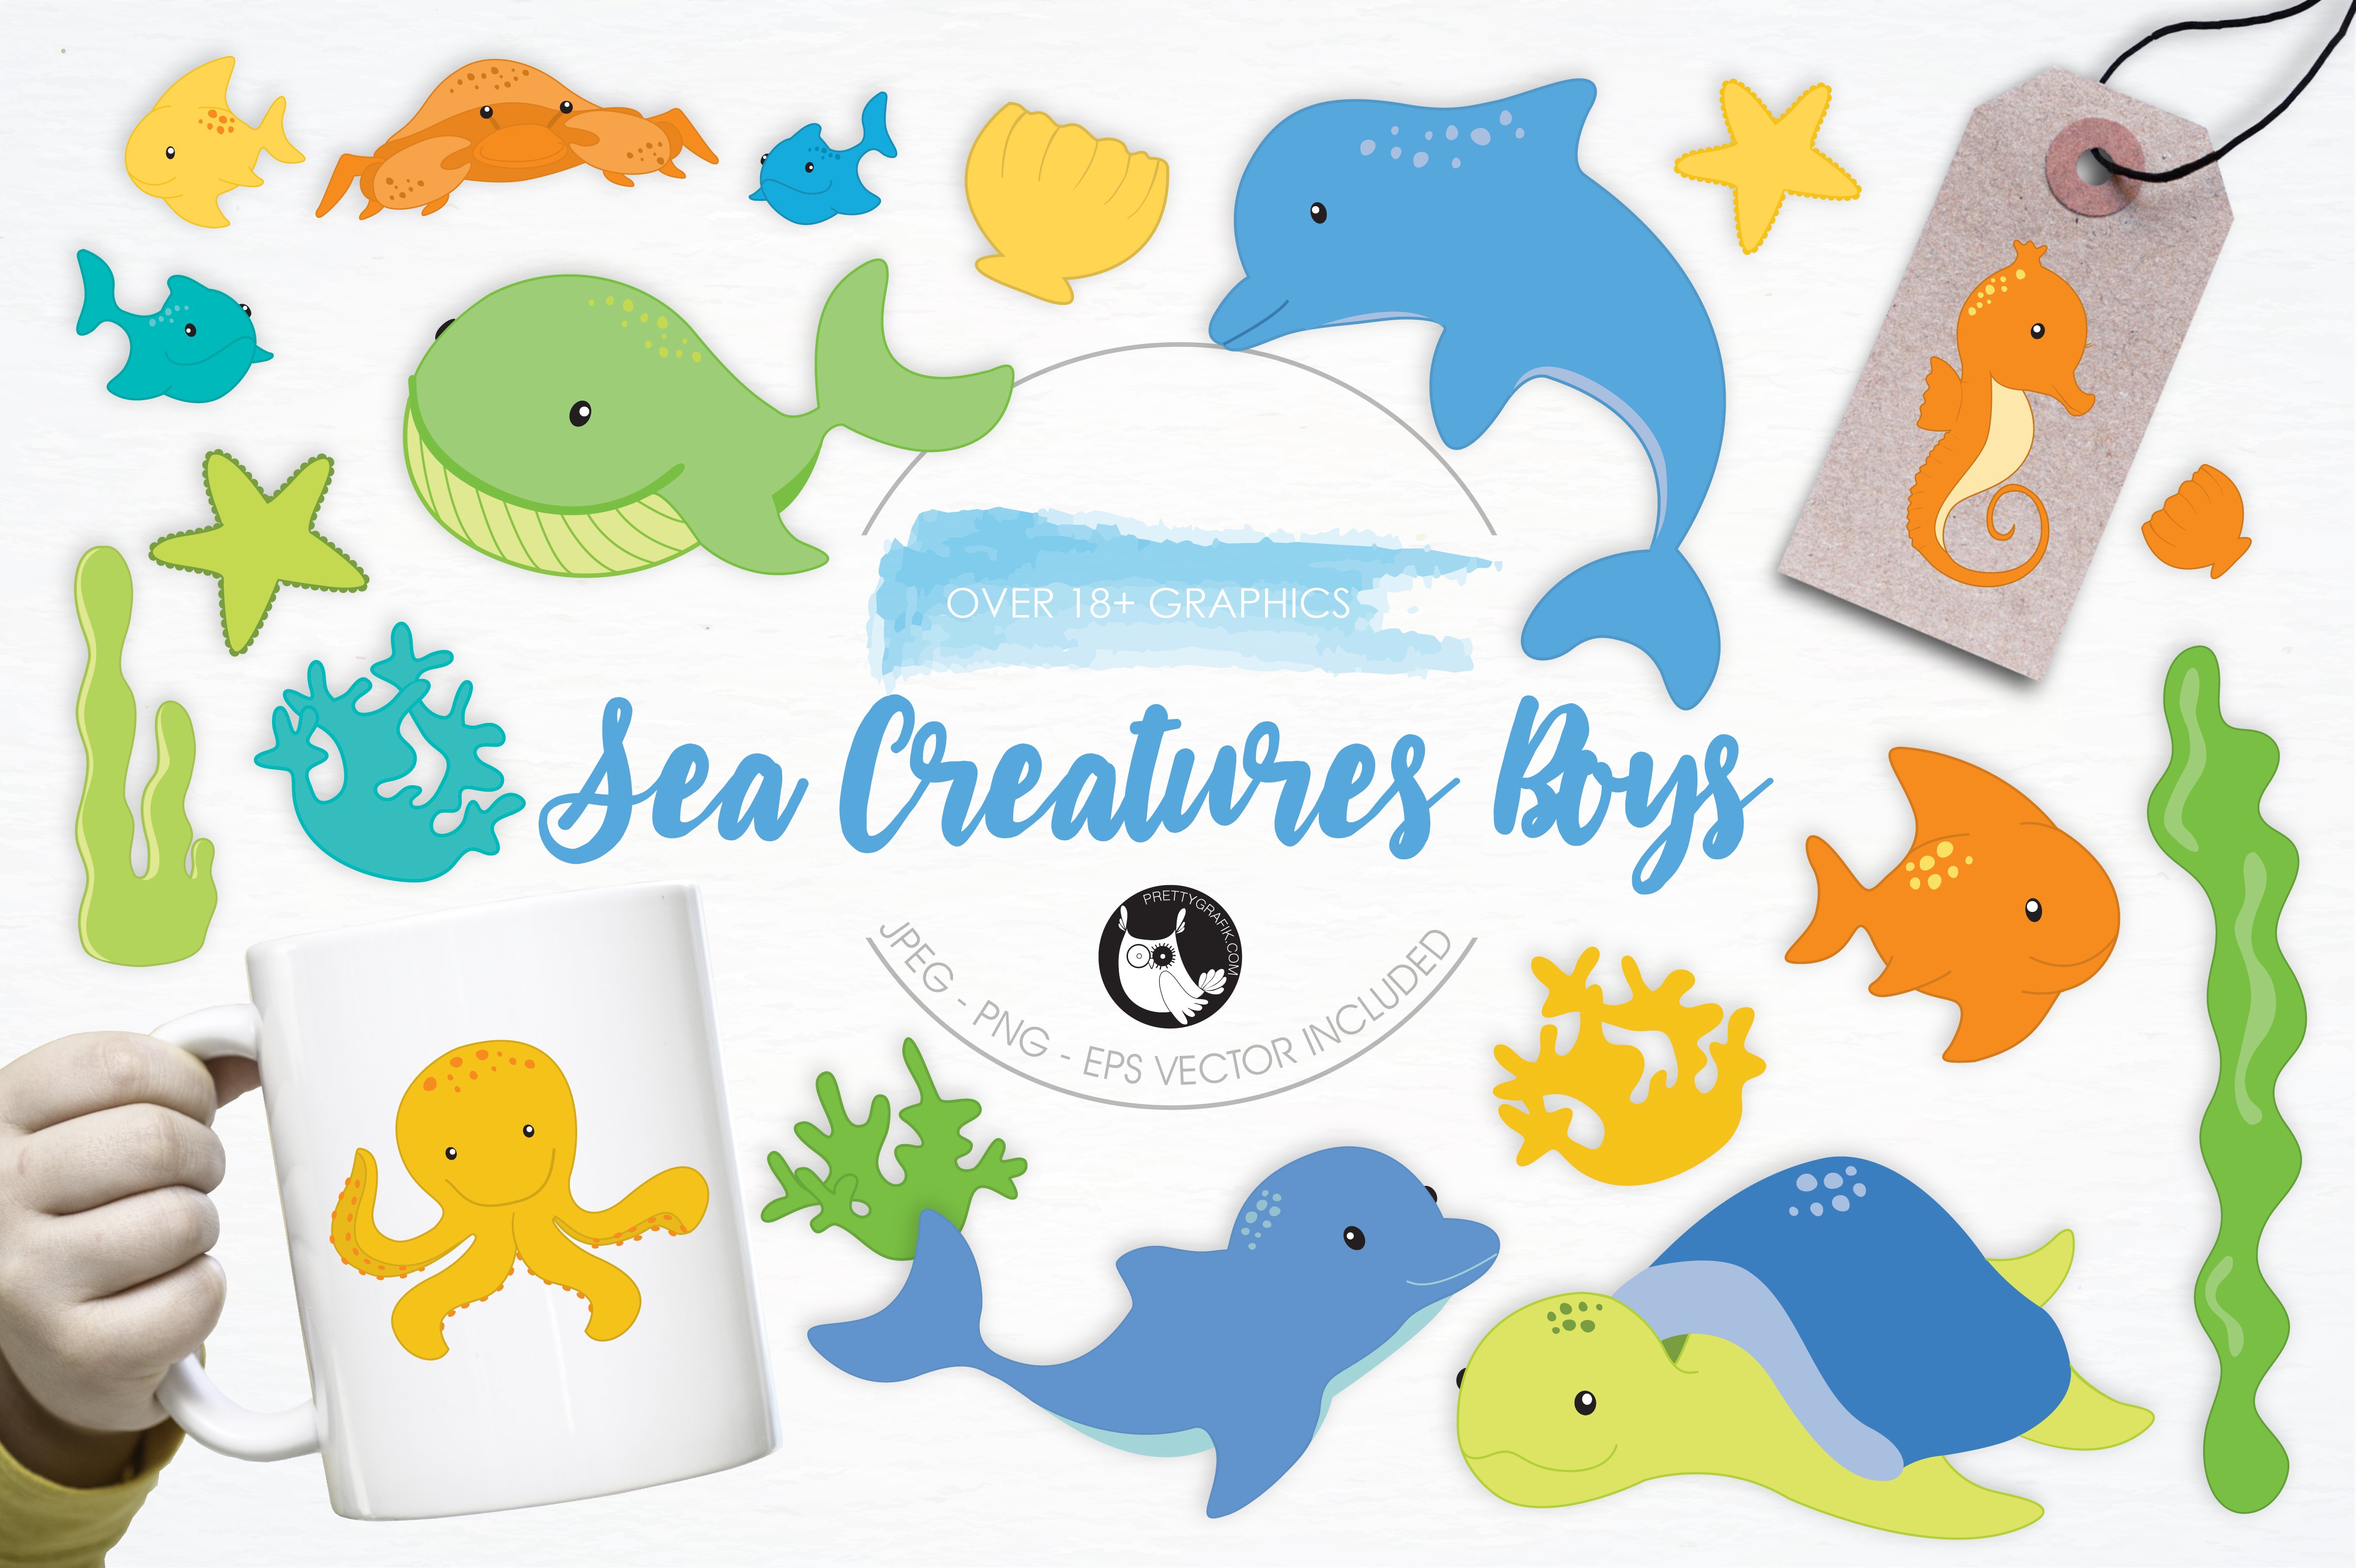 Sea Creatures Boys illustration pack - Vector Image